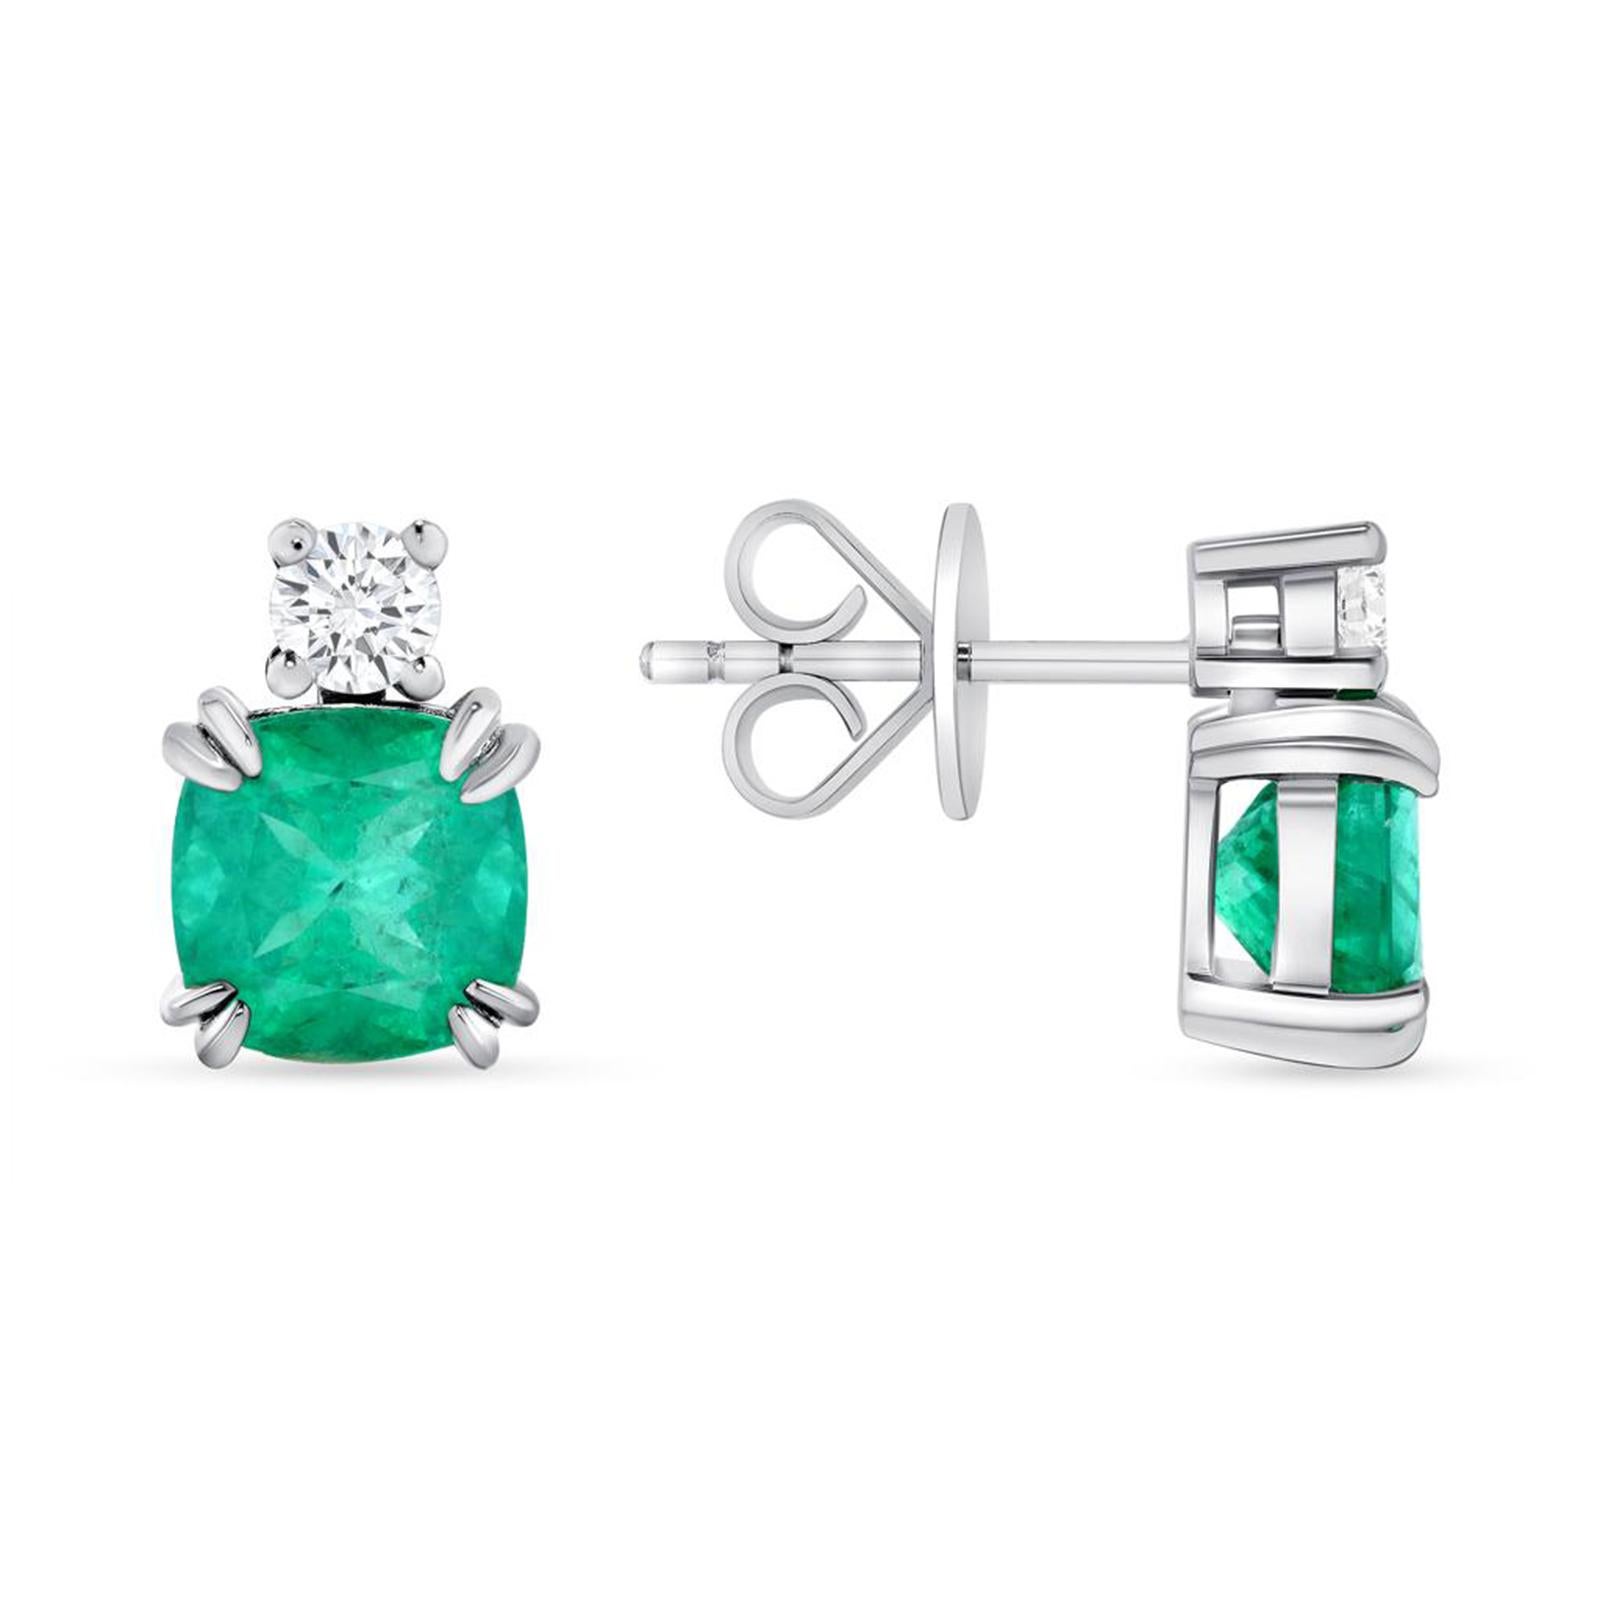 100% Authentic, 100% Customer Satisfaction

Height: 10 mm

Width: 7 mm

Metal:14K White Gold

Hallmarks: 14K

Total Weight: 2.25 Grams

Stone Type: 2.18 CT Natural Emerald & G SI2 0.22 CT Diamonds

Condition: New

Estimated Price: $7497

Stock